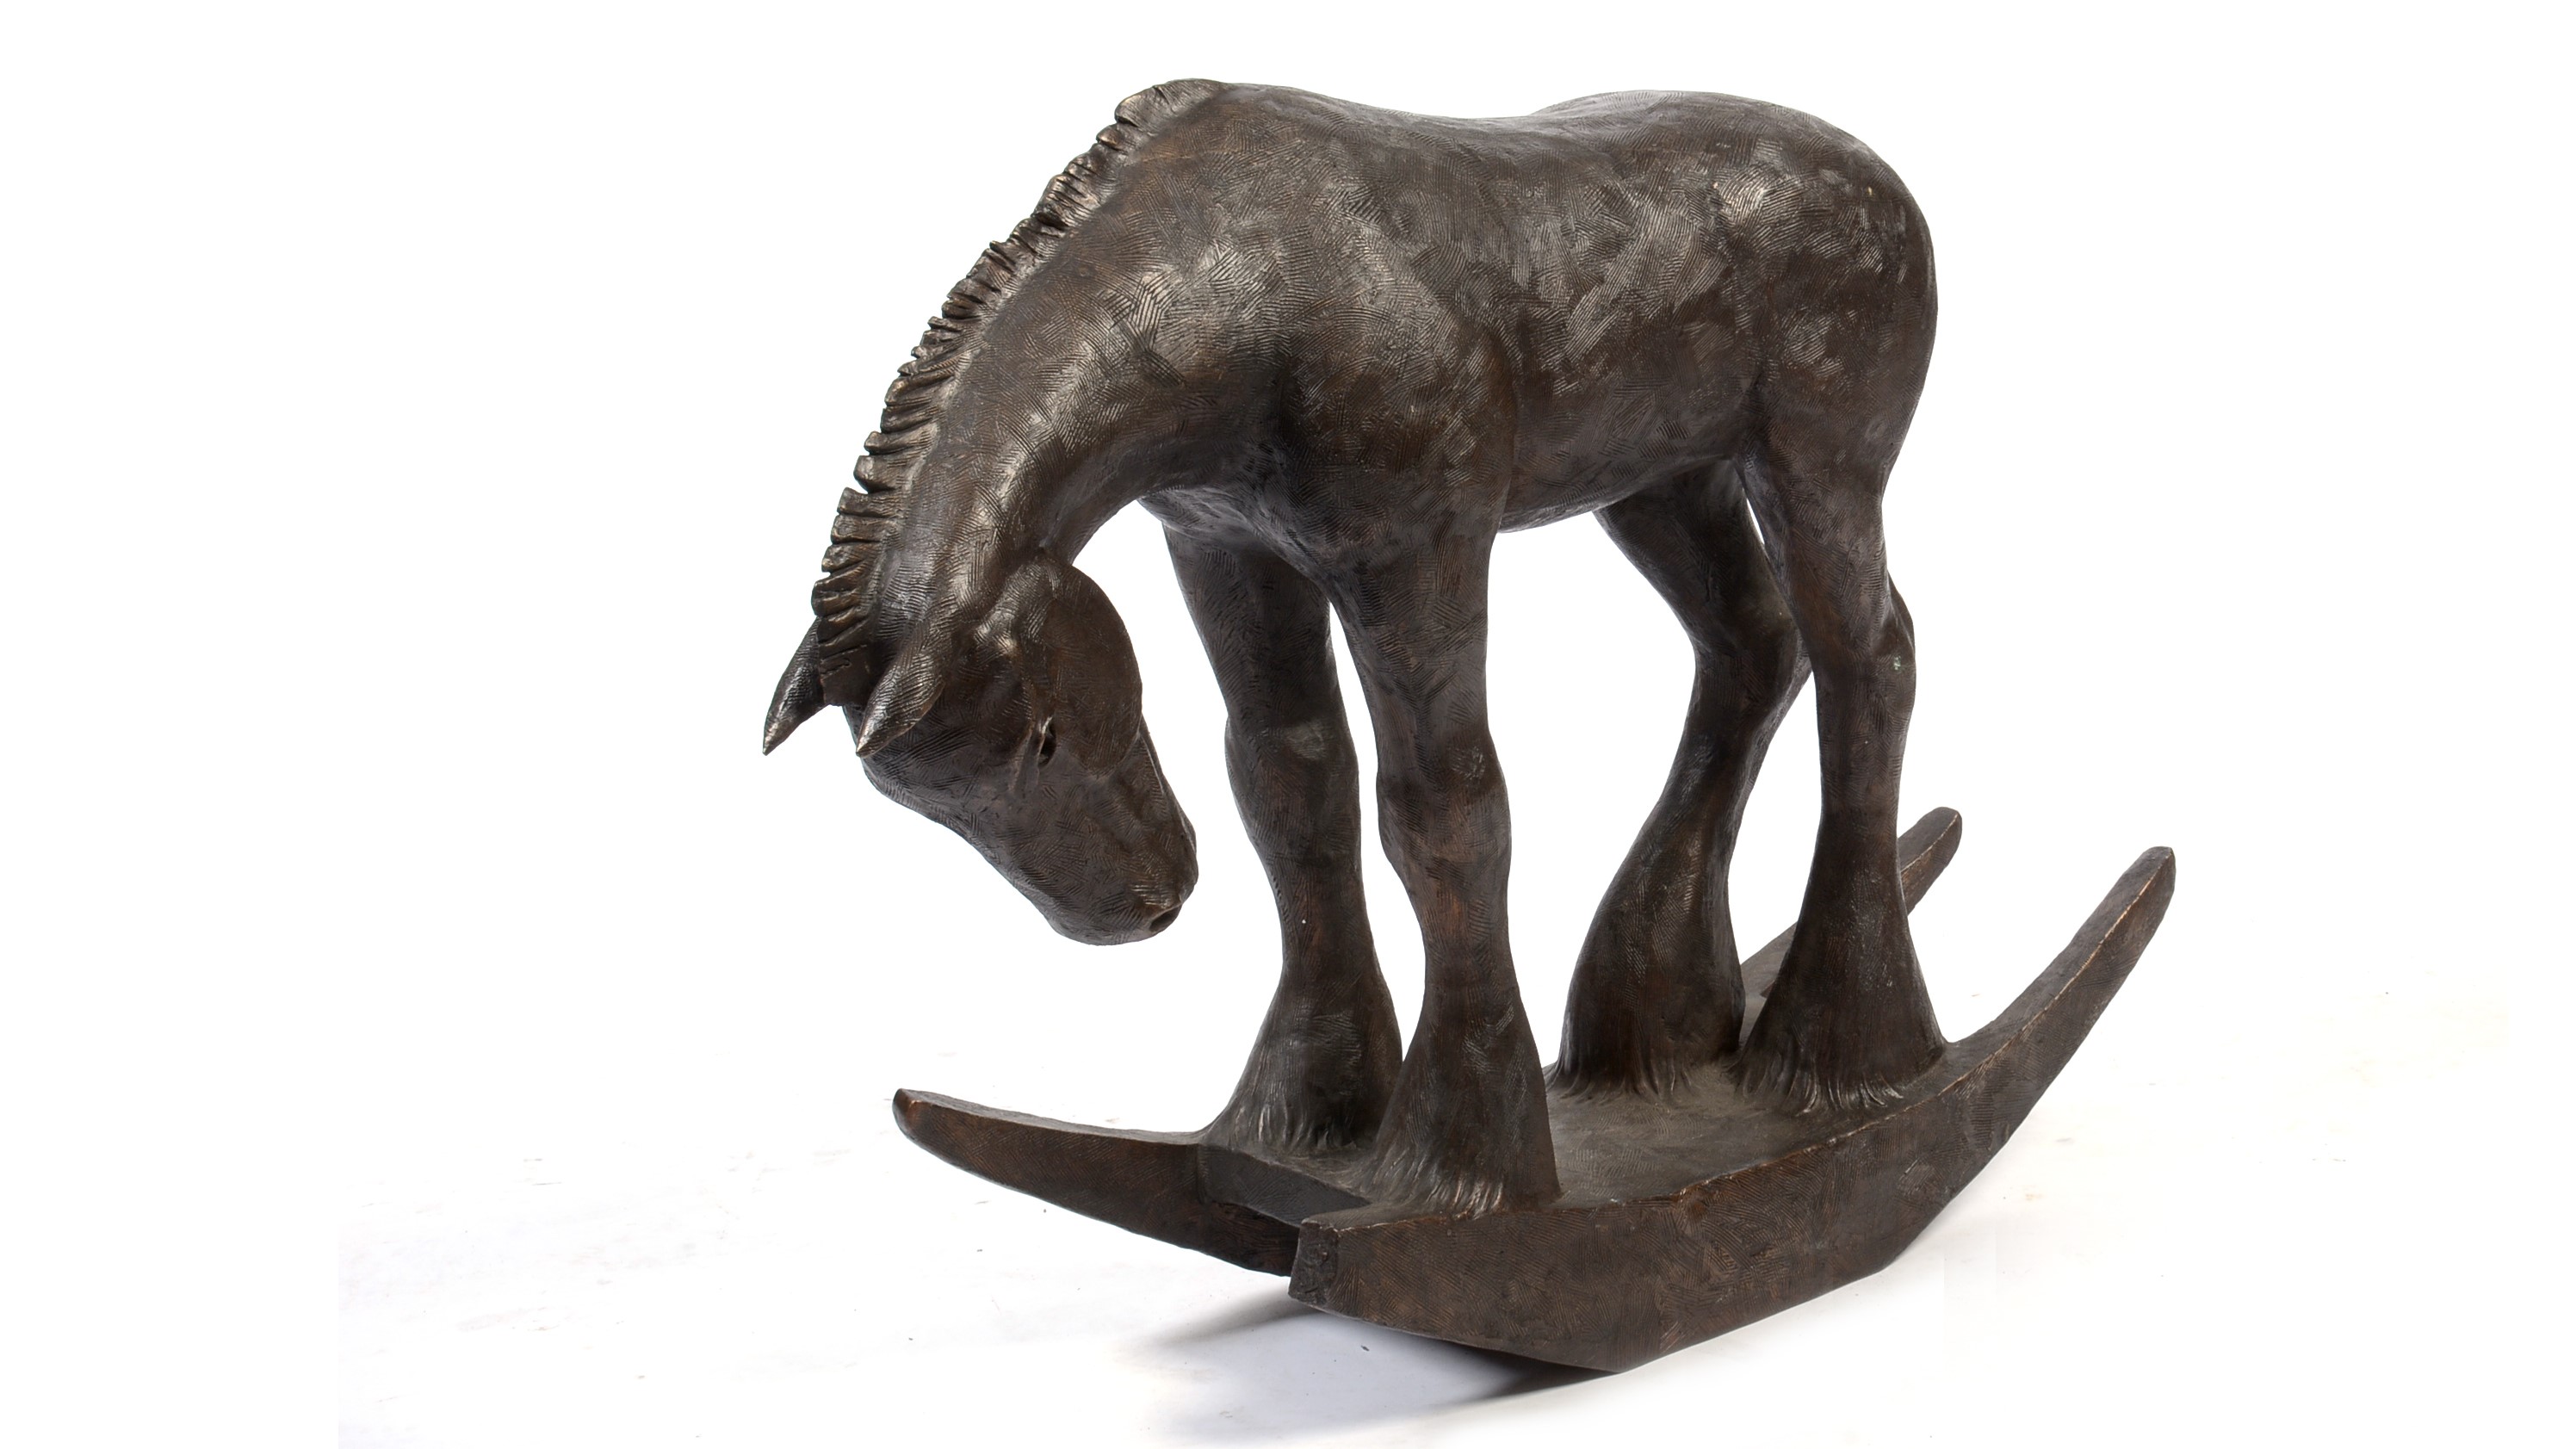 Sculpture gifted to charity by Scottish Artist Andy Scott up for auction next week